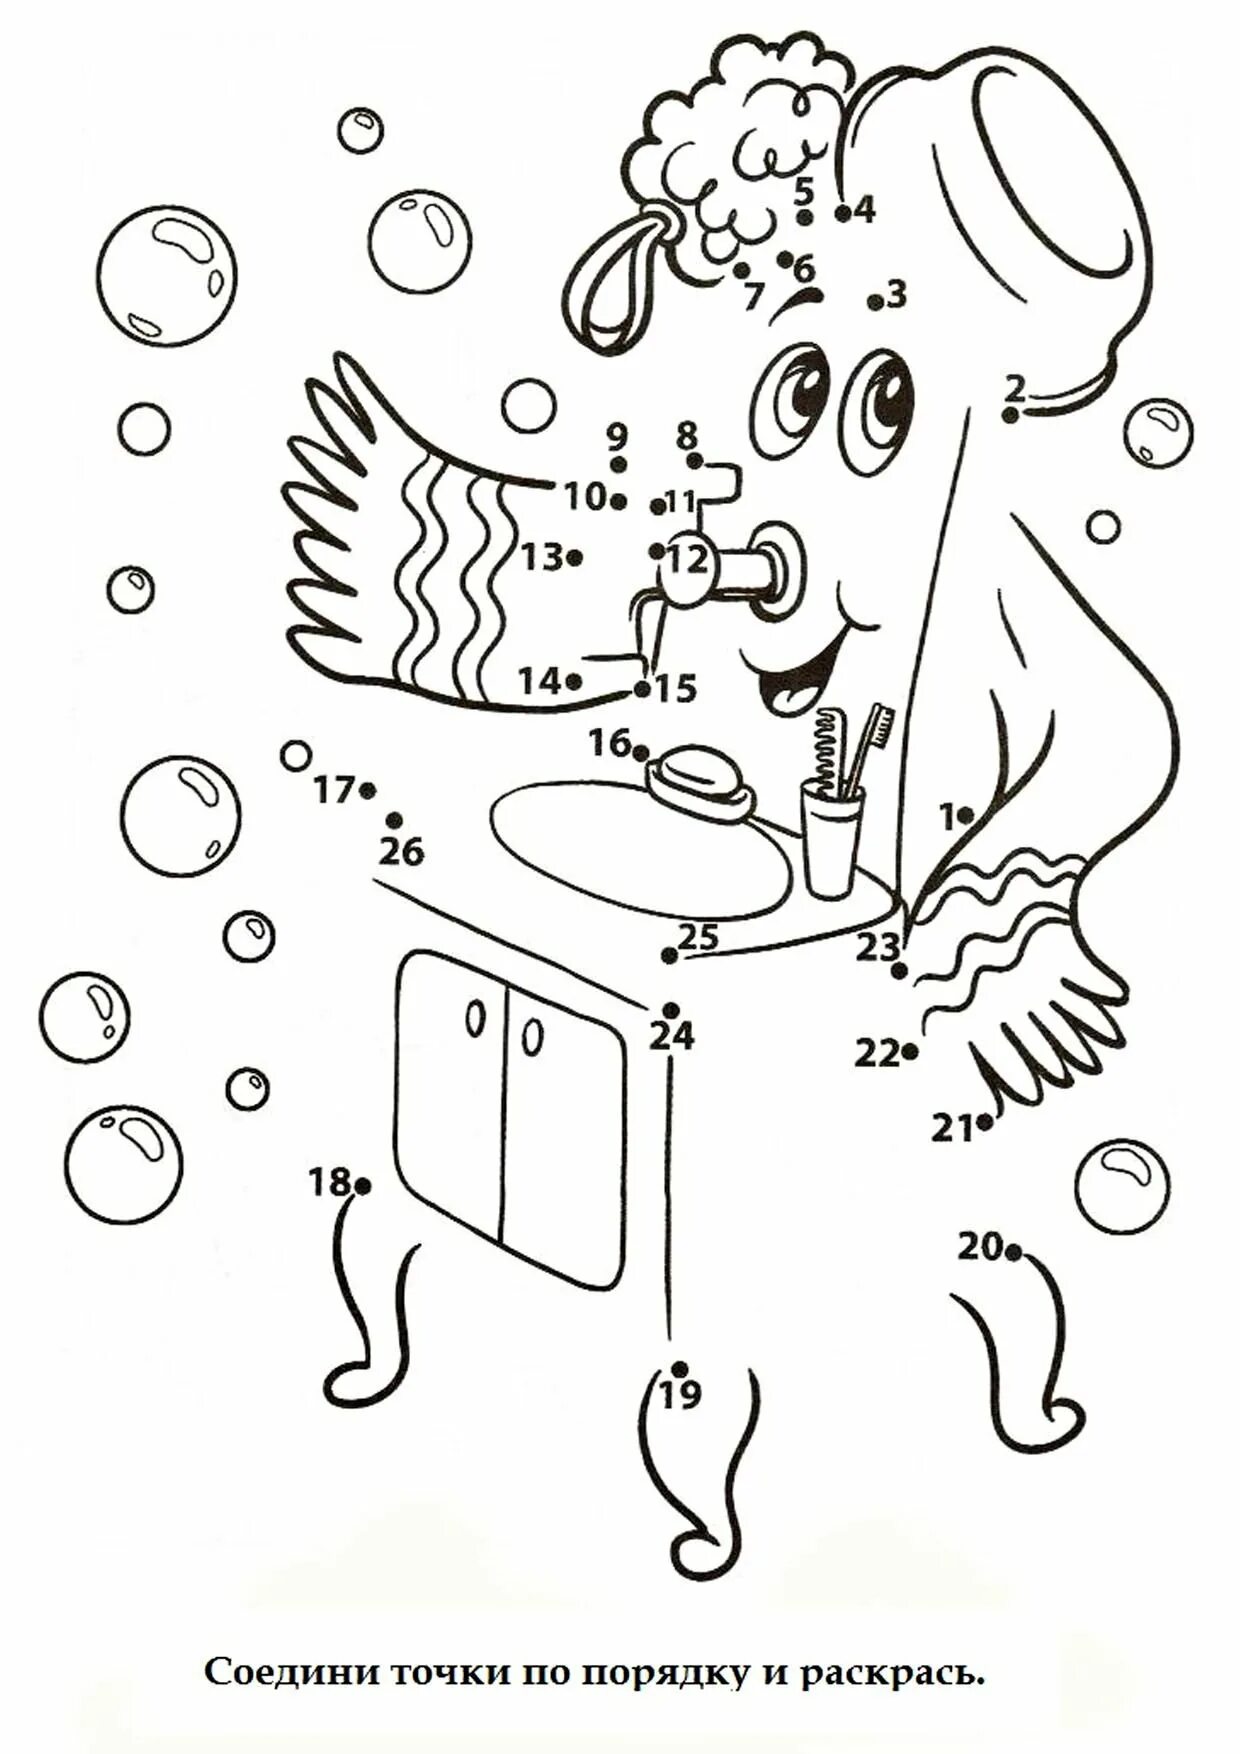 Color-bright moidodyr coloring page for children 3-4 years old